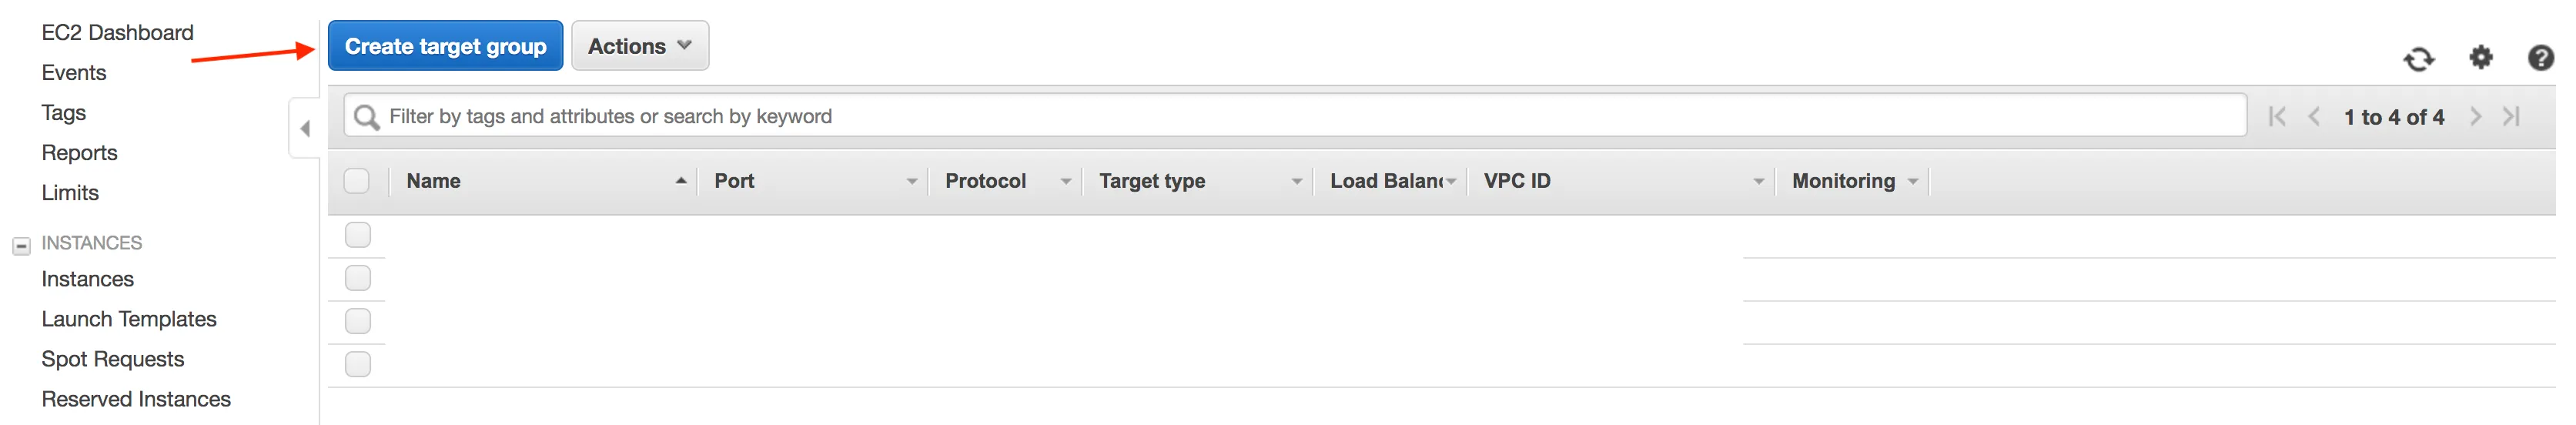 Go to Target Groups of your EC2 account and click “Create target group”.